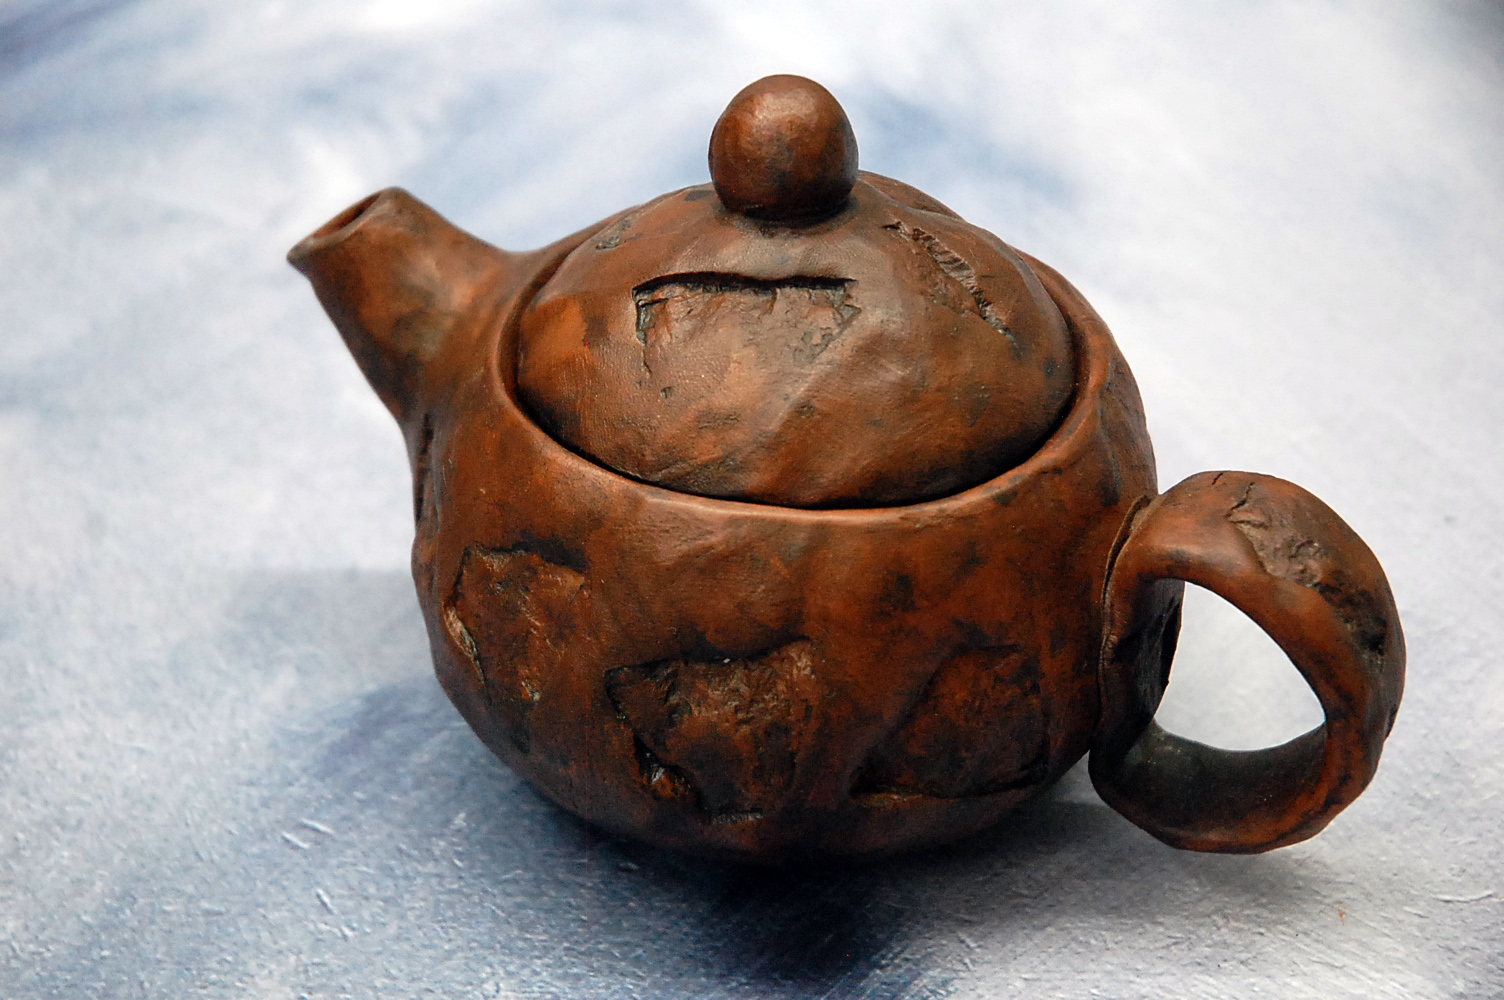 Stones pottery clay tea brewing pot or teapot for tea ceremony